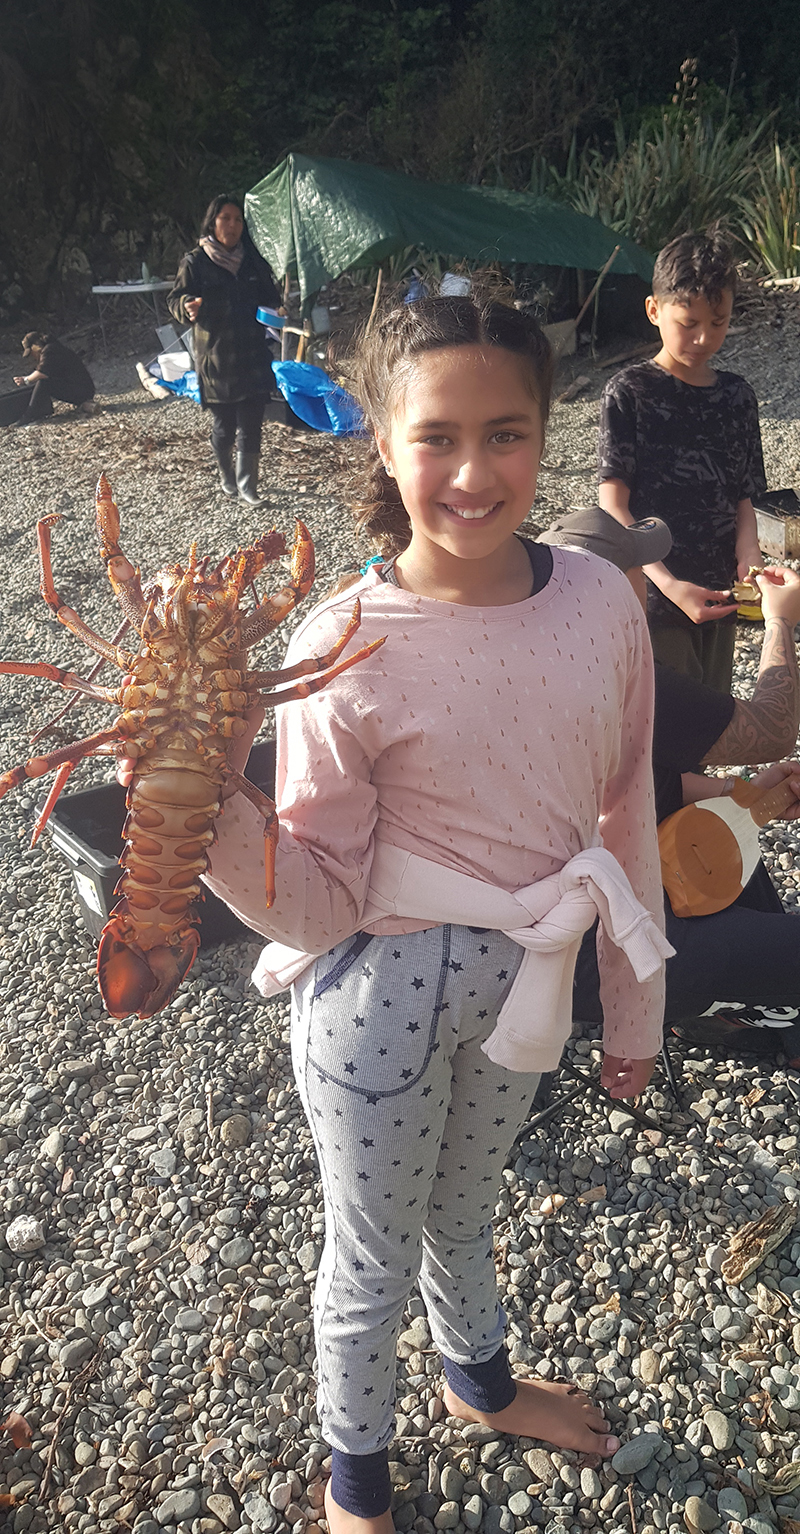 A young girl shows a large crayfish to the camera. She is standing on a rocky beach There are people behind her in the campsite.